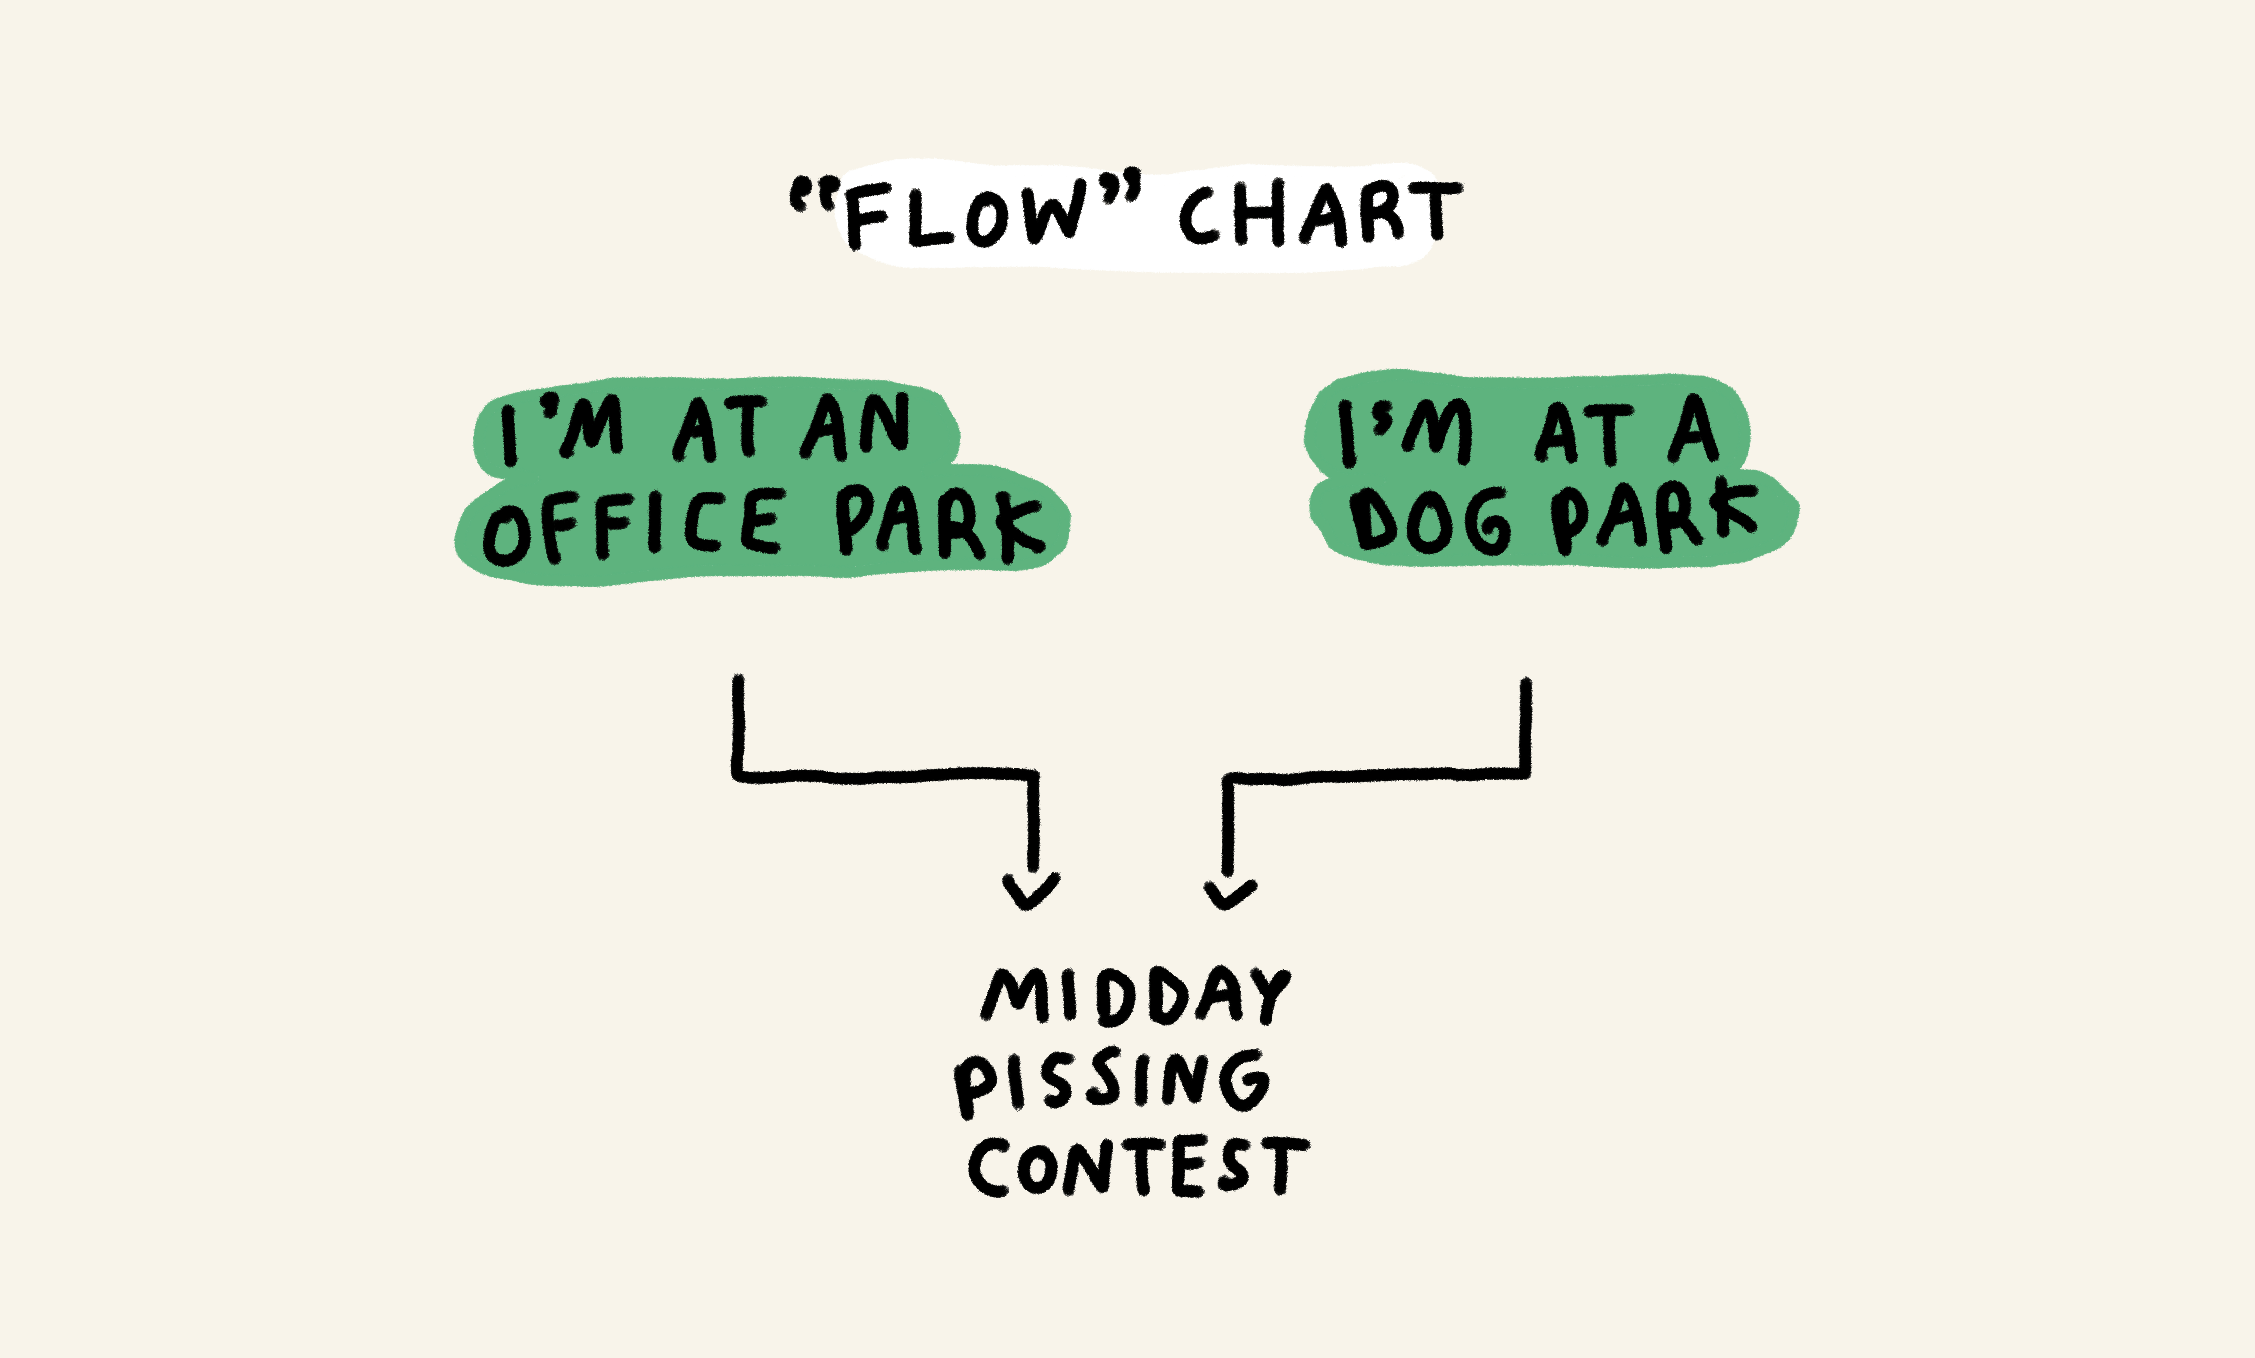 "Flow" chart

I'm at an office park -->
I'm at a dog park -->
Midday pissing contest